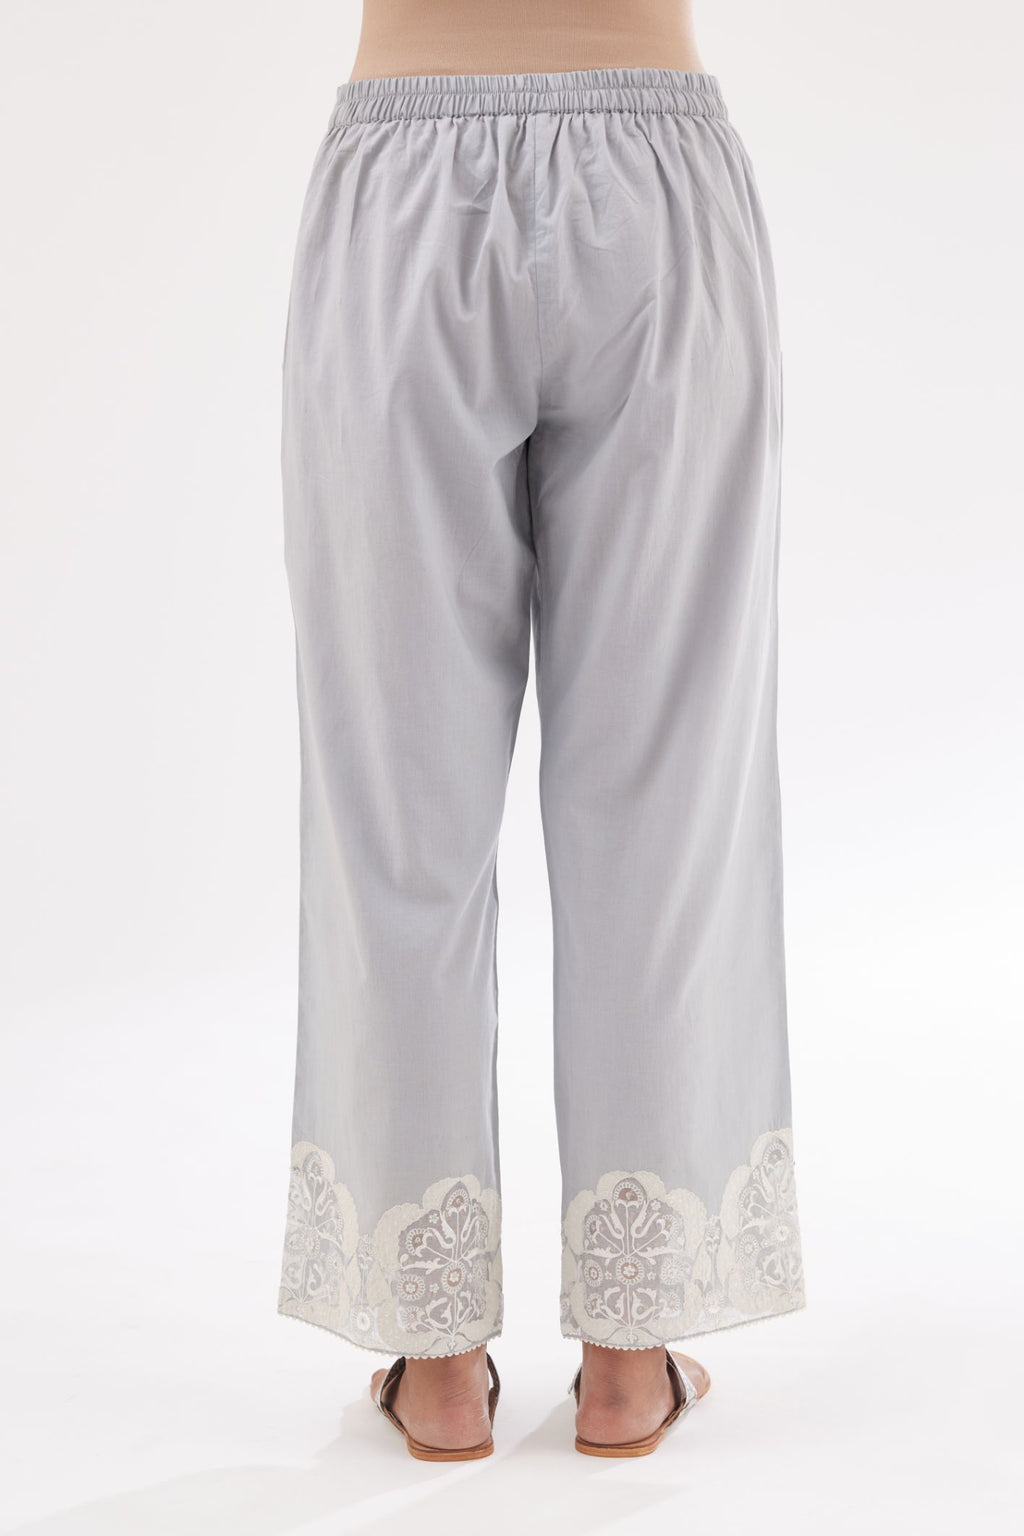 Blue cotton straight pants with appliqué and hand attached sequins detailing at bottom hem.